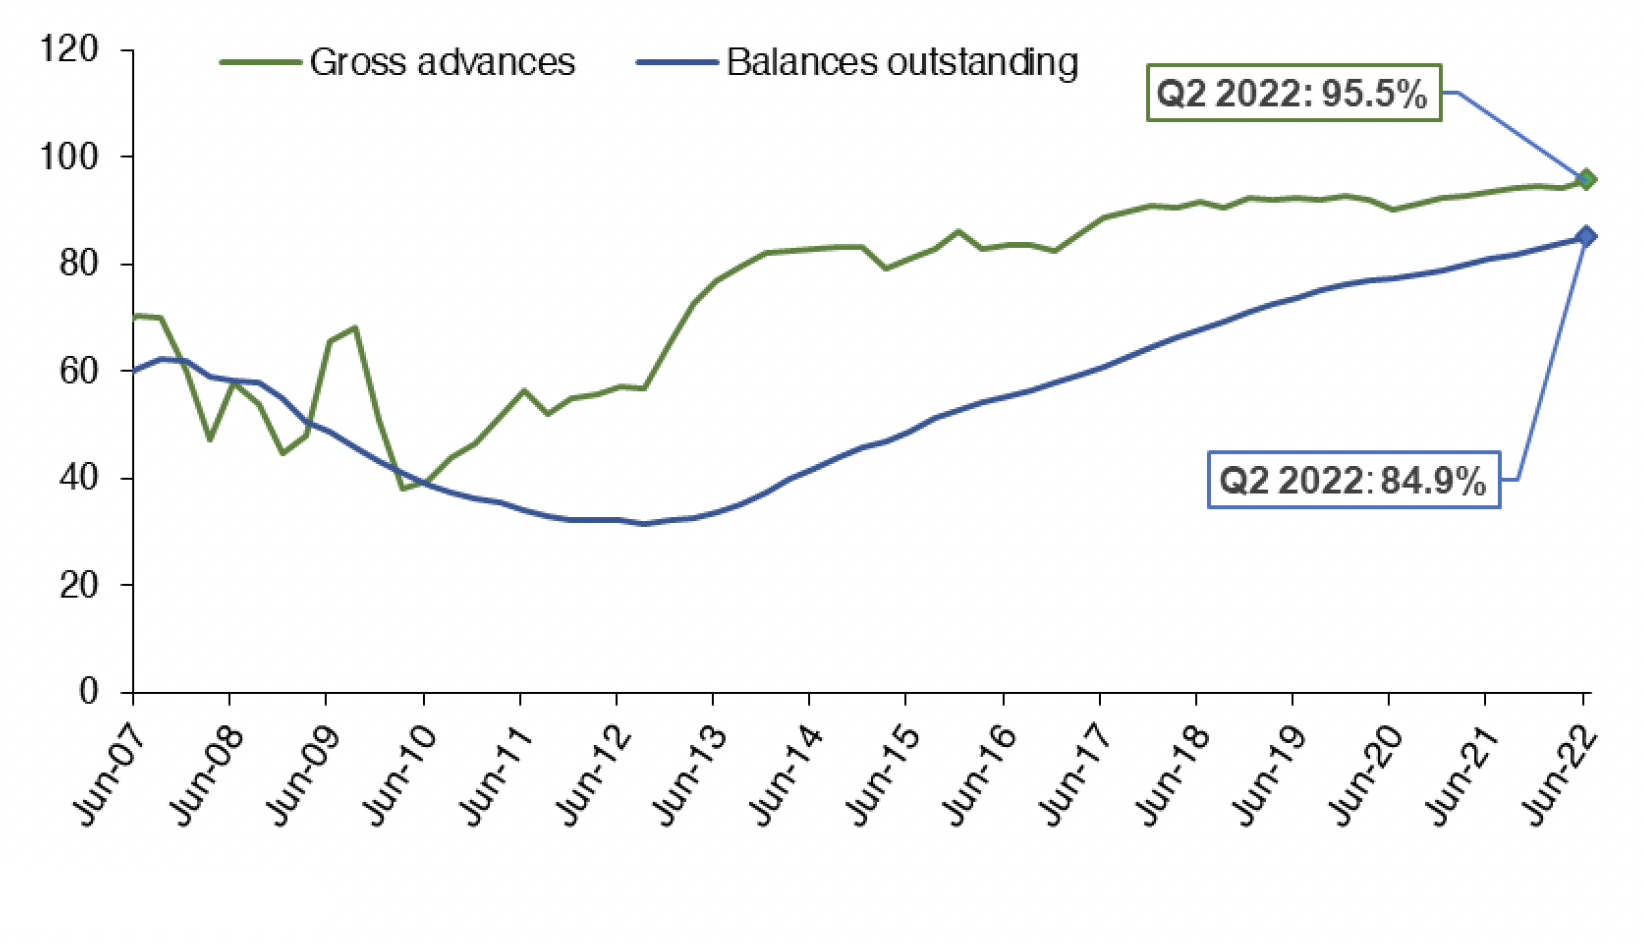 Chart 6.4 details how the share of regulated mortgage lending at fixed rates has progressed for gross advances (i.e. new mortgages) and for balances outstanding (existing mortgages) from Q2 2007 to Q2 2022. 